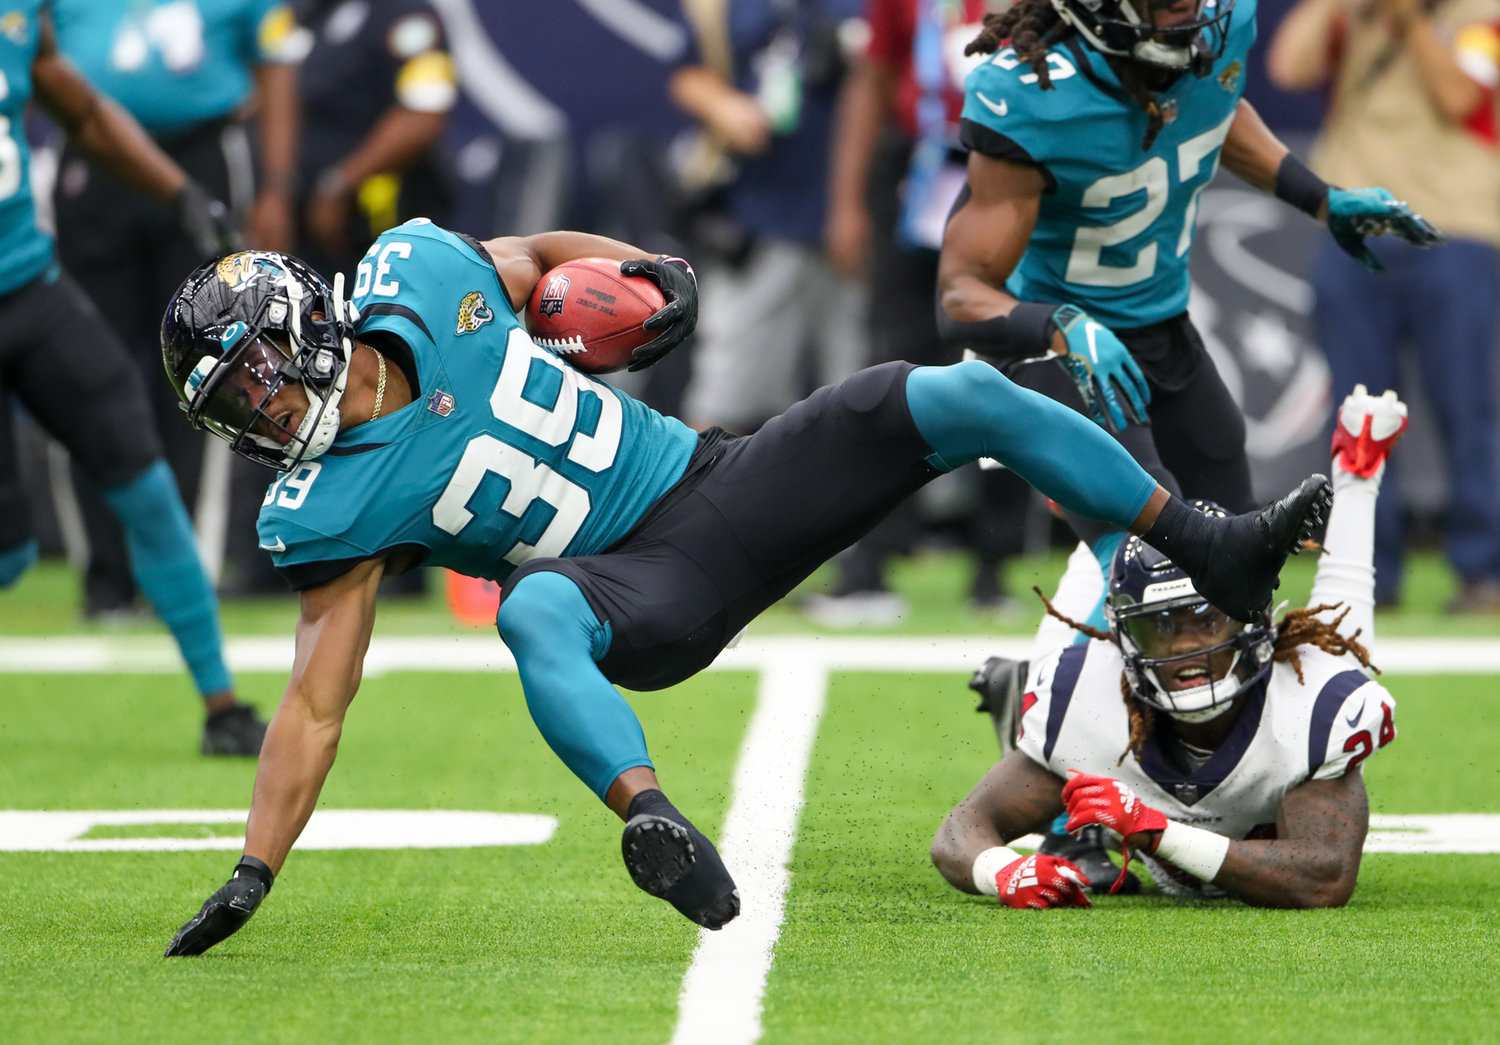 Houston Texans defensive back Tremon Smith (24) trips up Jacksonville Jaguars wide receiver Jamal Agnew (39) during the first half of an NFL game between the Houston Texans and the Jacksonville Jaguars on September 12, 2021 in Houston, Texas.